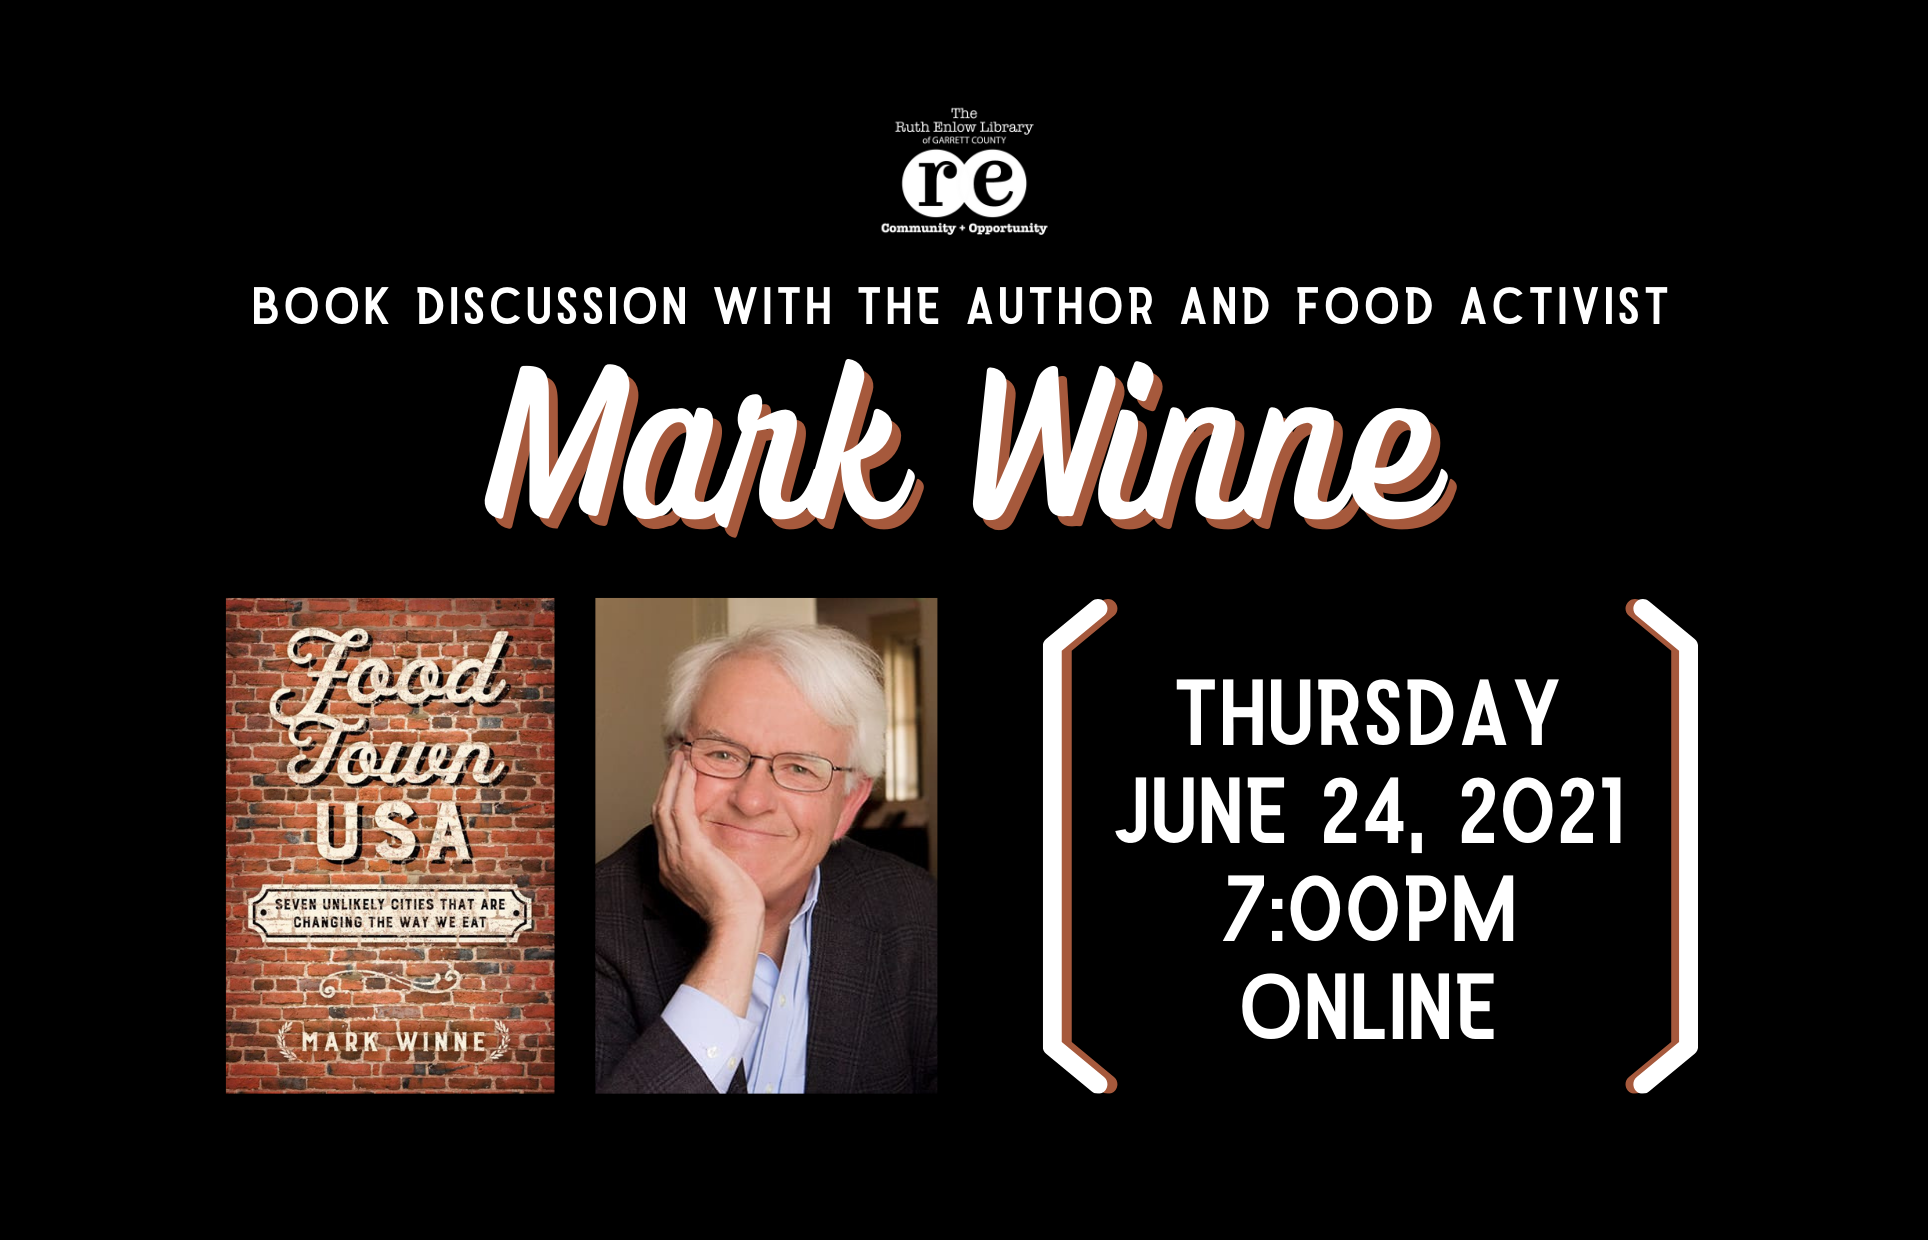 photo of mark winne next to book cover for food town usa over a black background